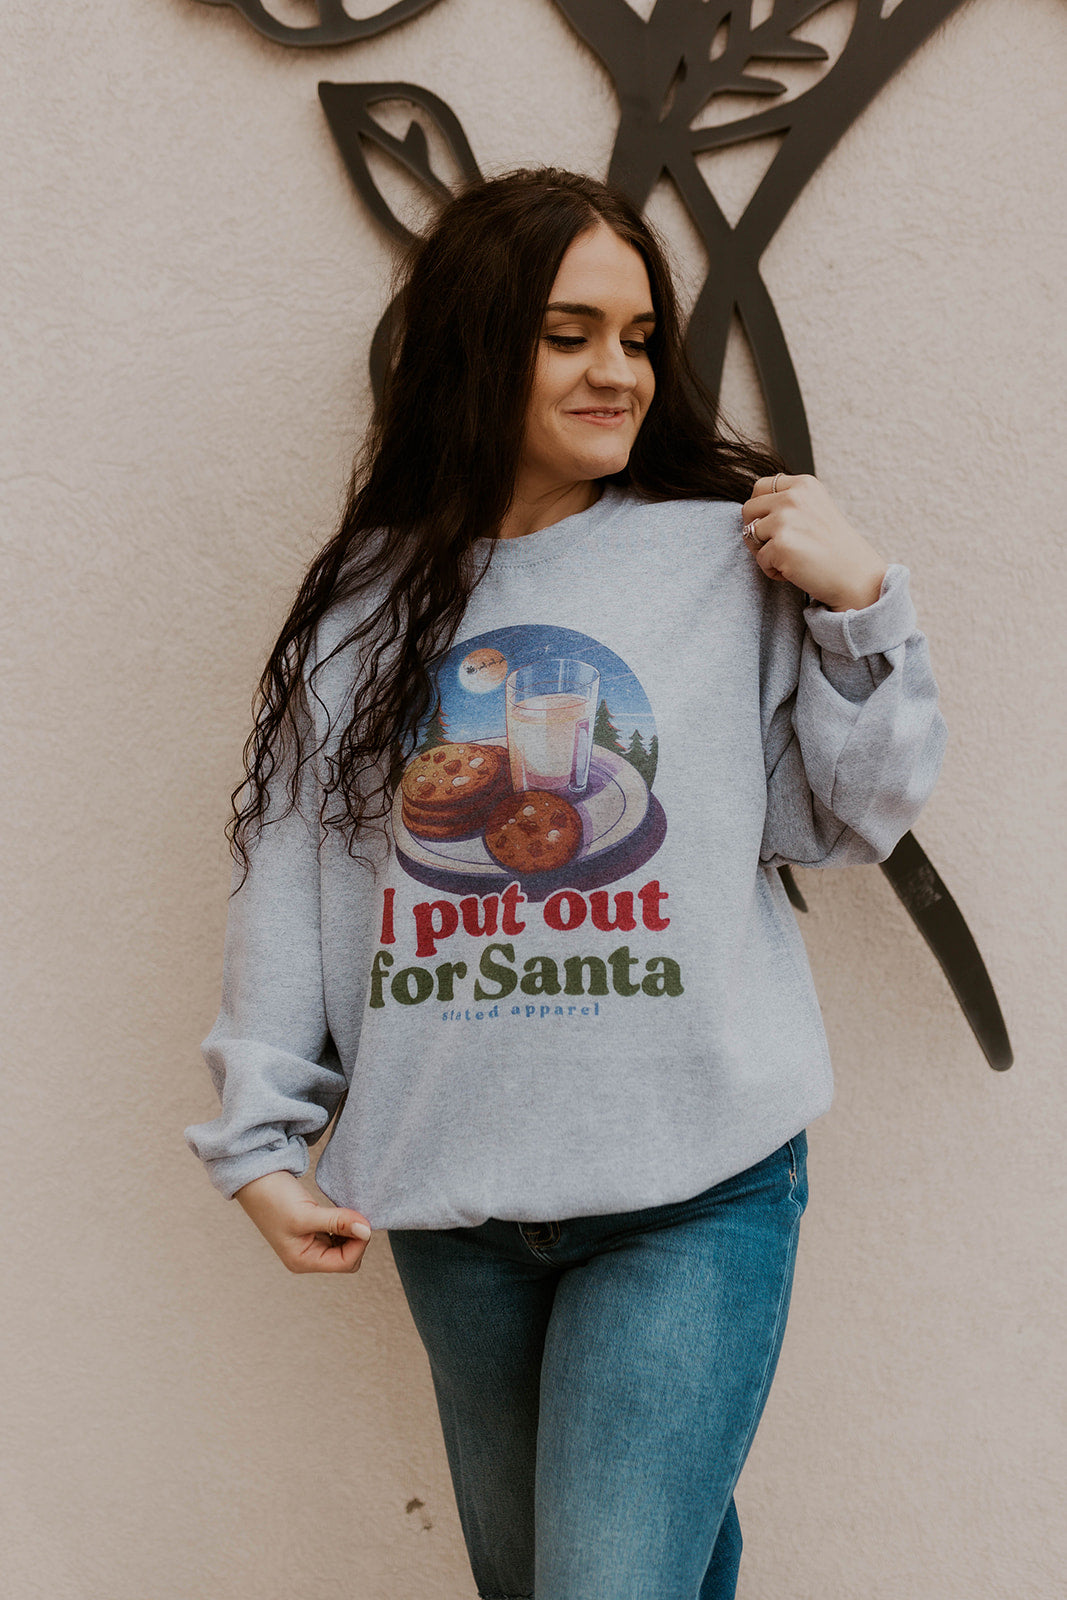 Christmas Sweatshirt that Says "I Put Out for Santa"  with picture of Cookies & milk